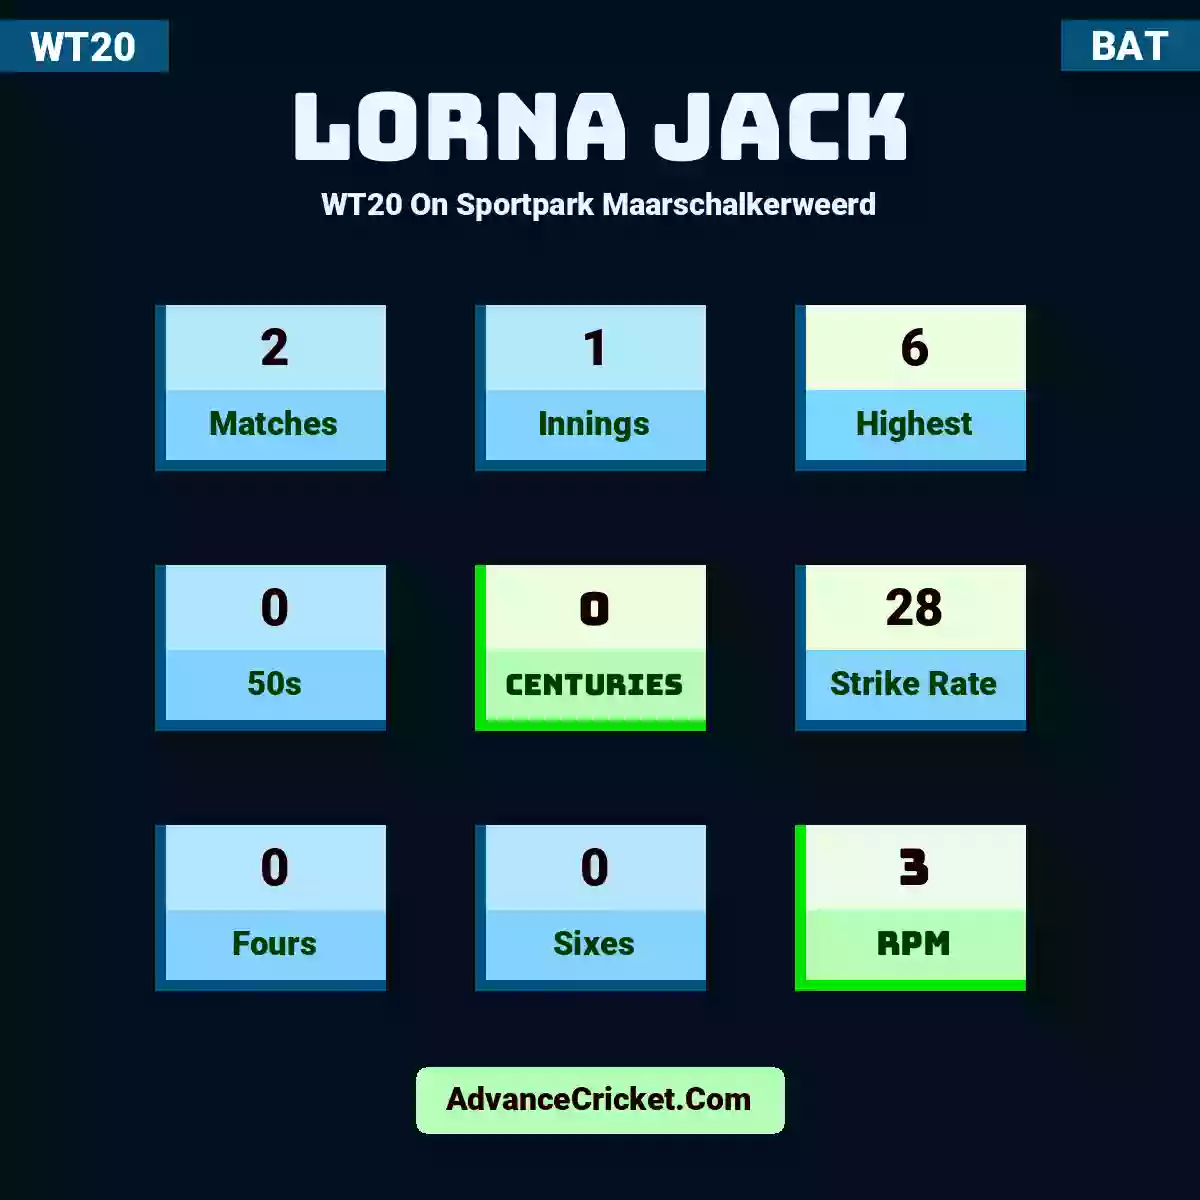 Lorna Jack WT20  On Sportpark Maarschalkerweerd, Lorna Jack played 2 matches, scored 6 runs as highest, 0 half-centuries, and 0 centuries, with a strike rate of 28. L.Jack hit 0 fours and 0 sixes, with an RPM of 3.